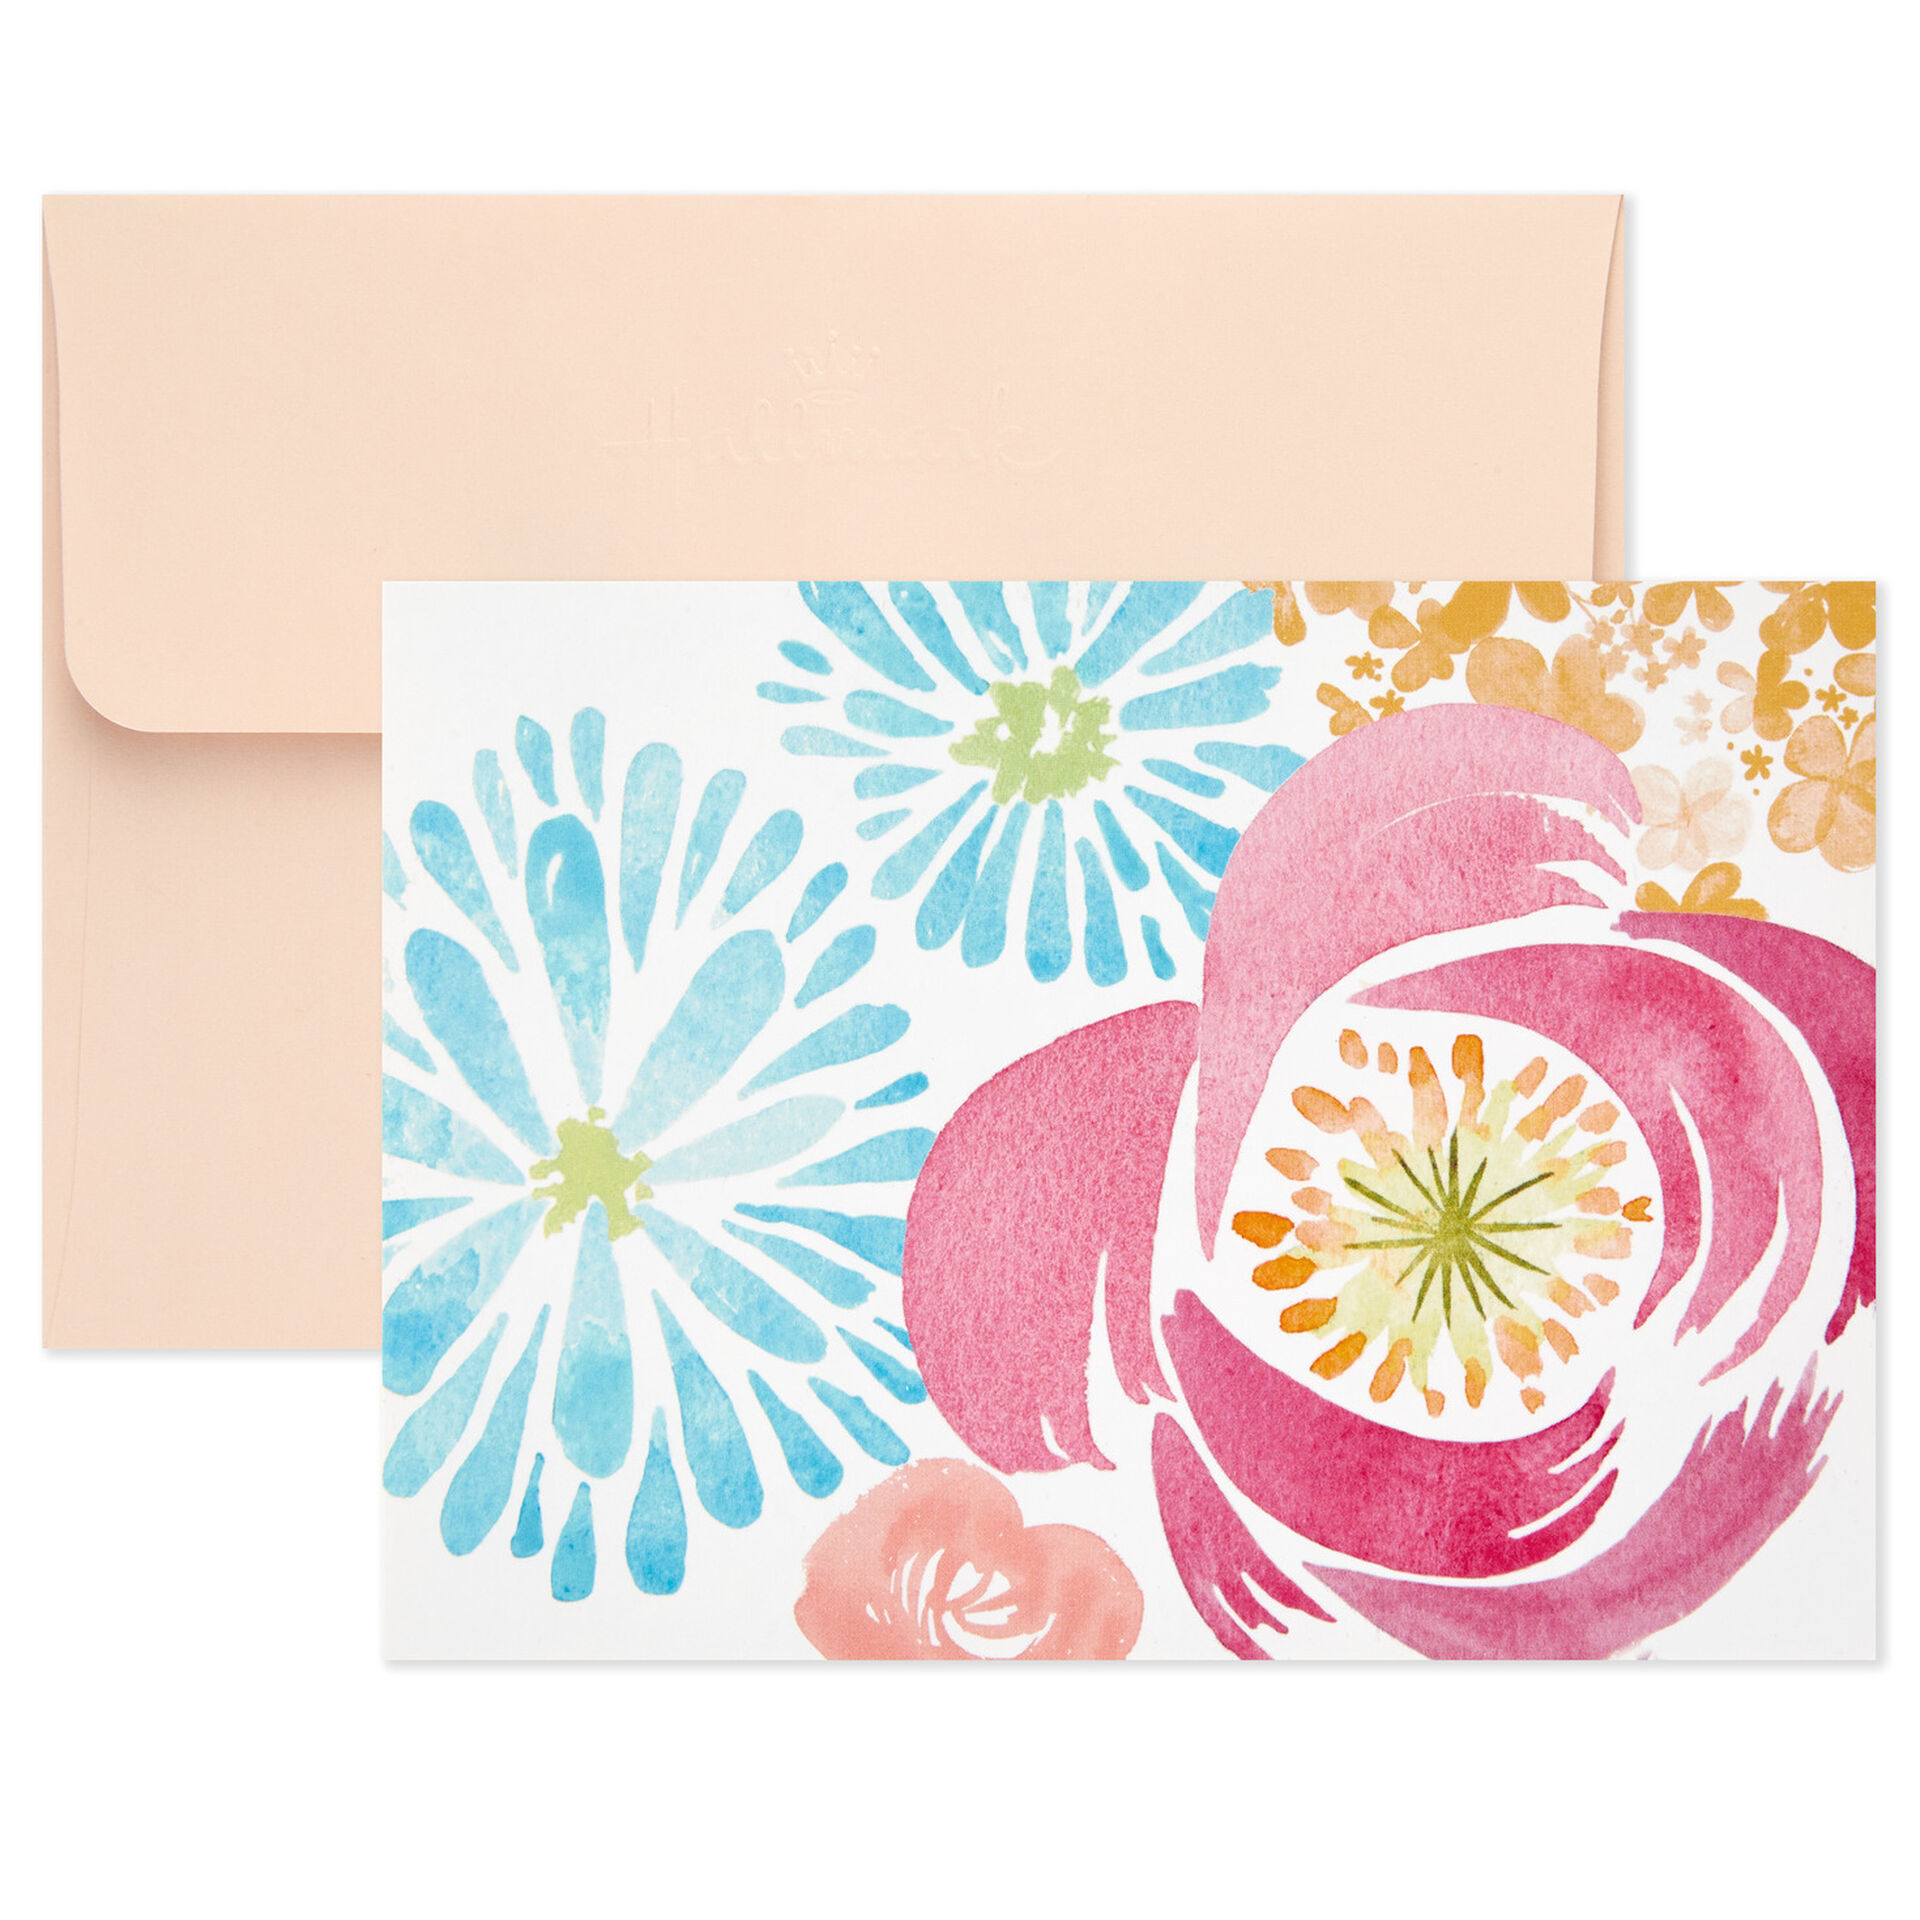 Watercolor-Blank-Note-Cards-Assortment-Pack_5WDN2068_03